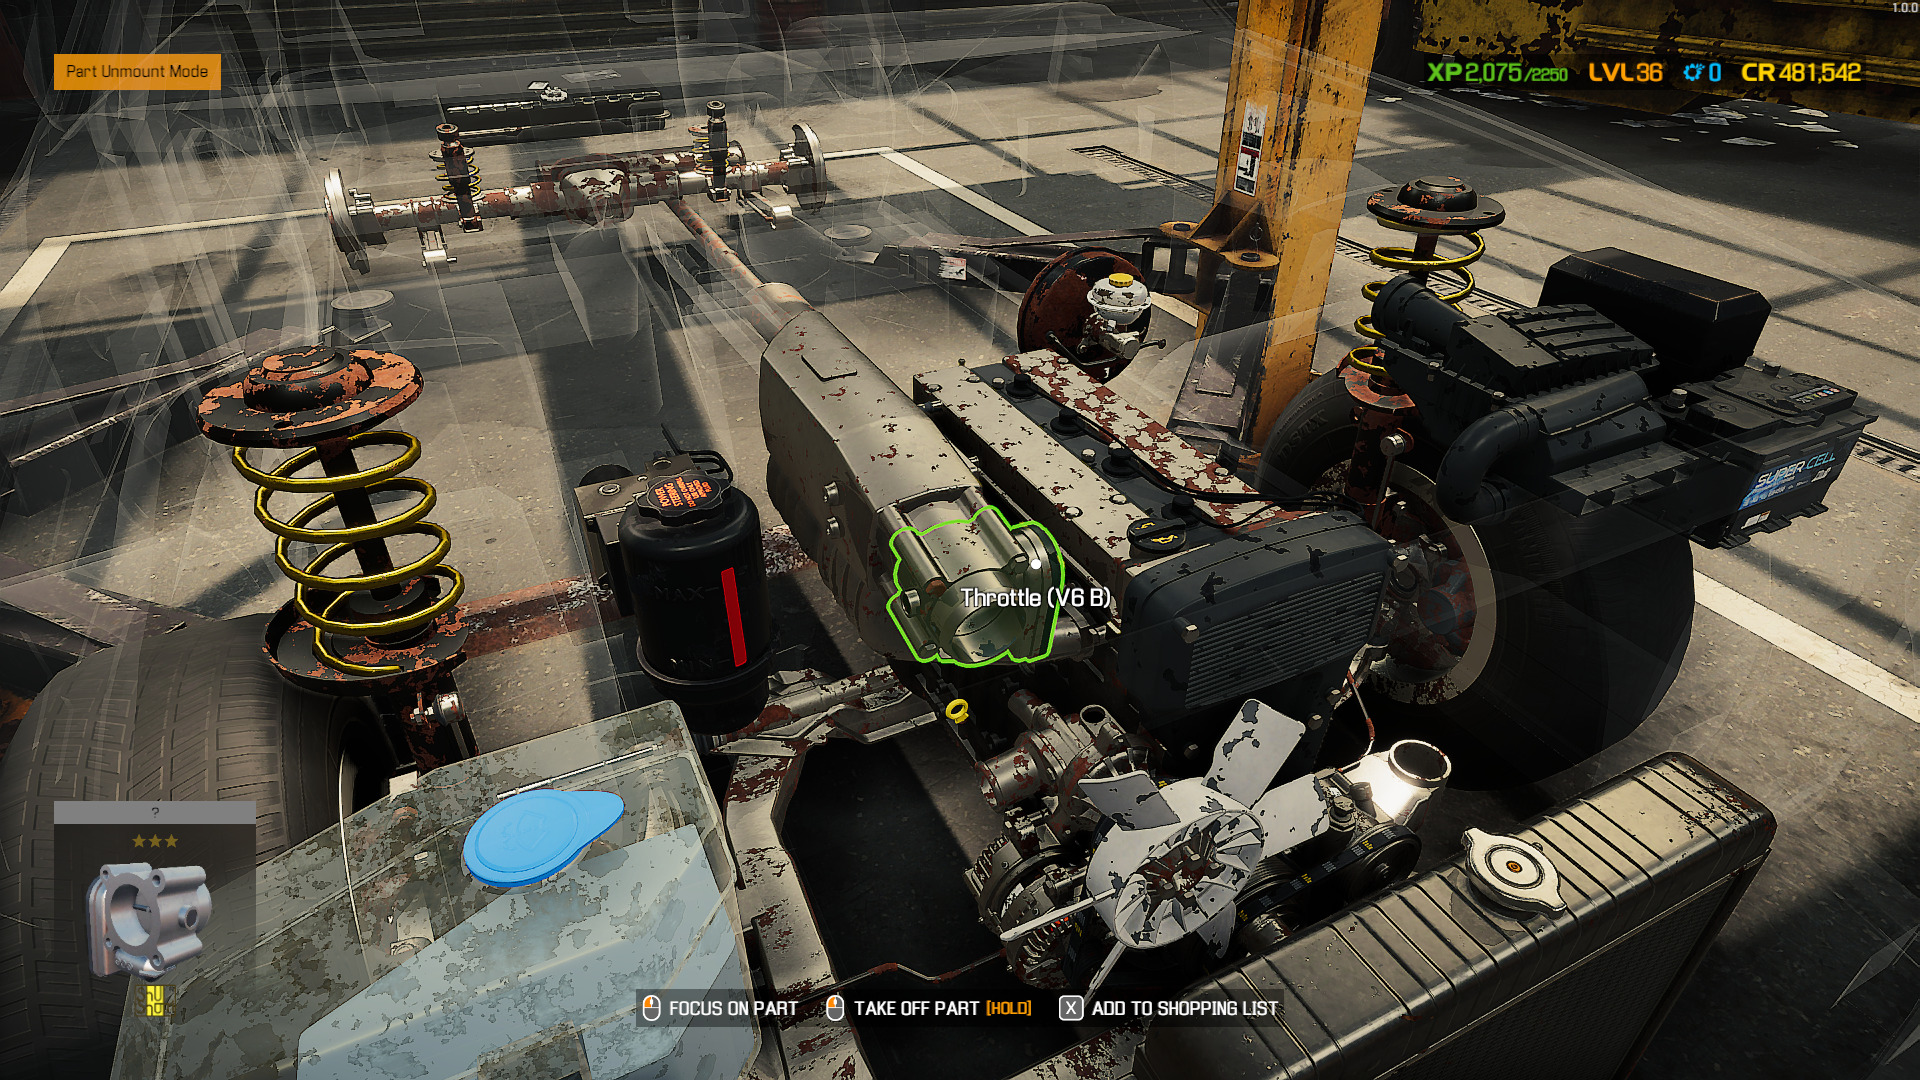 A screenshot showing the Throttle selected in Car Mechanic Simulator